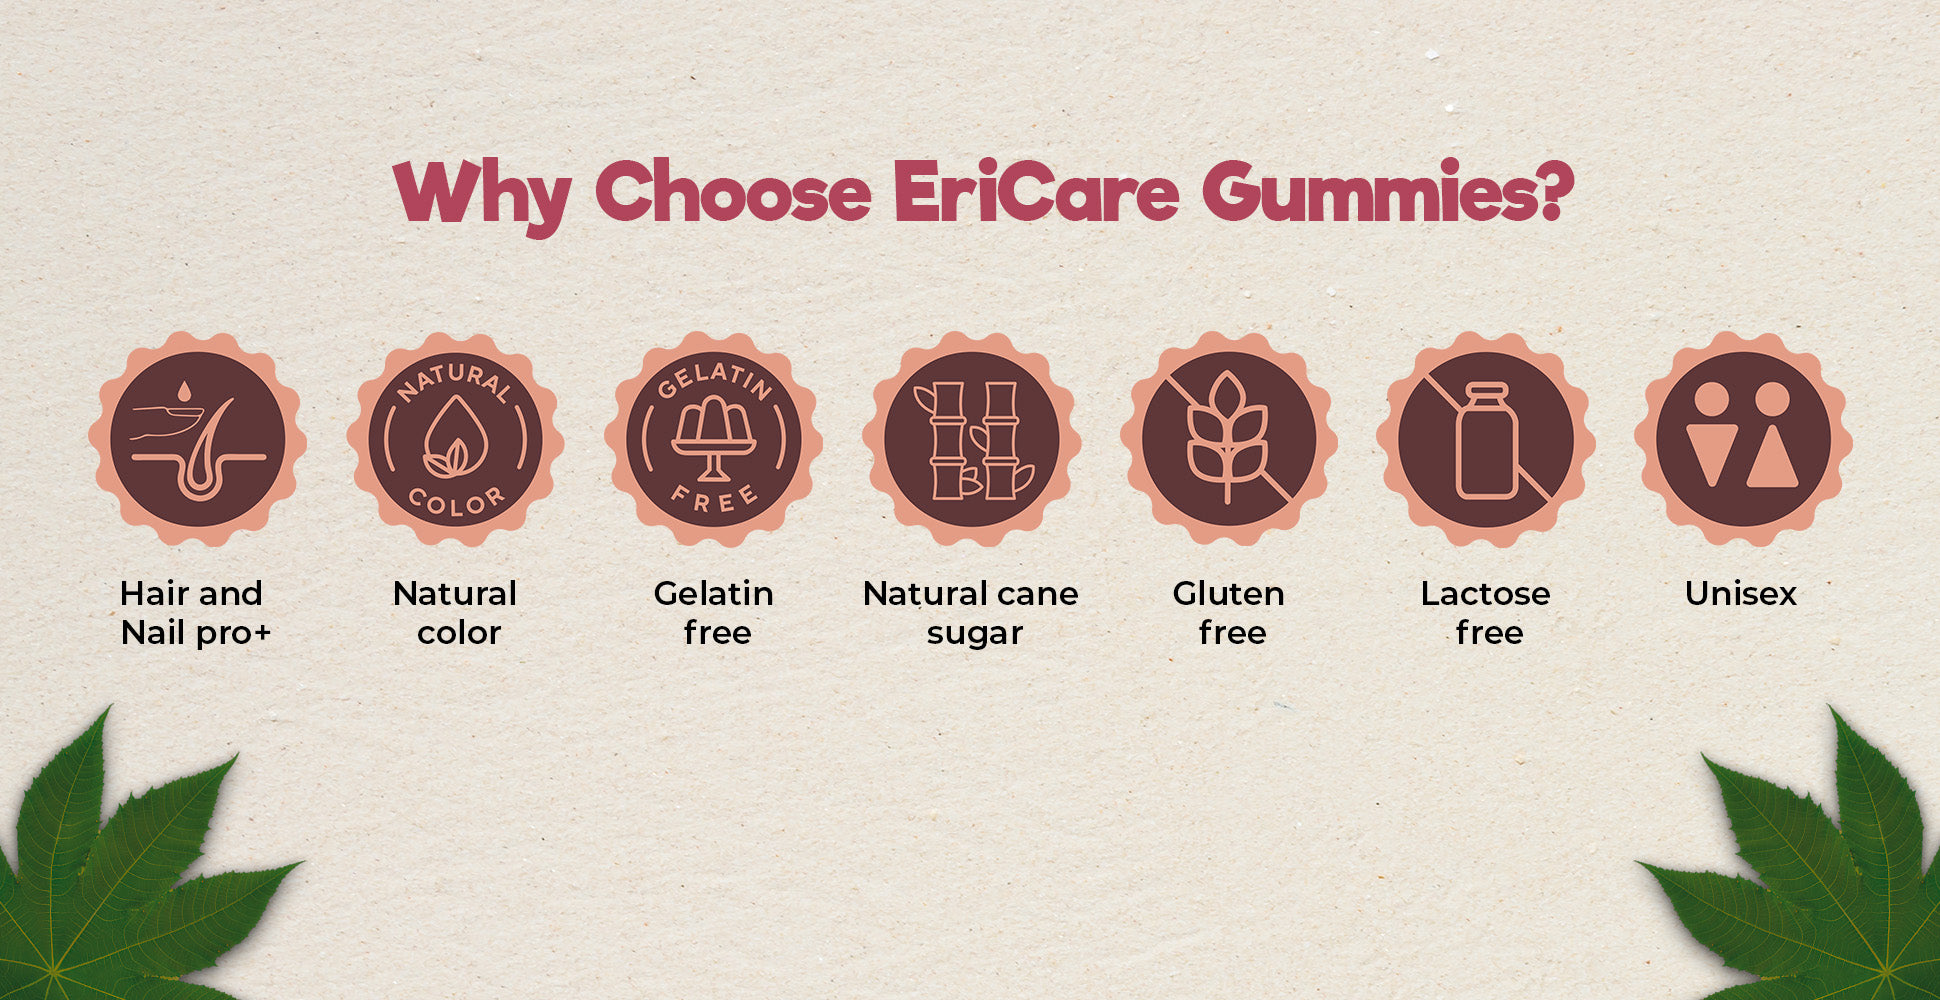 Why choose EriCare Castor Oil Biotin Gummies for Healthy Hair and Nail